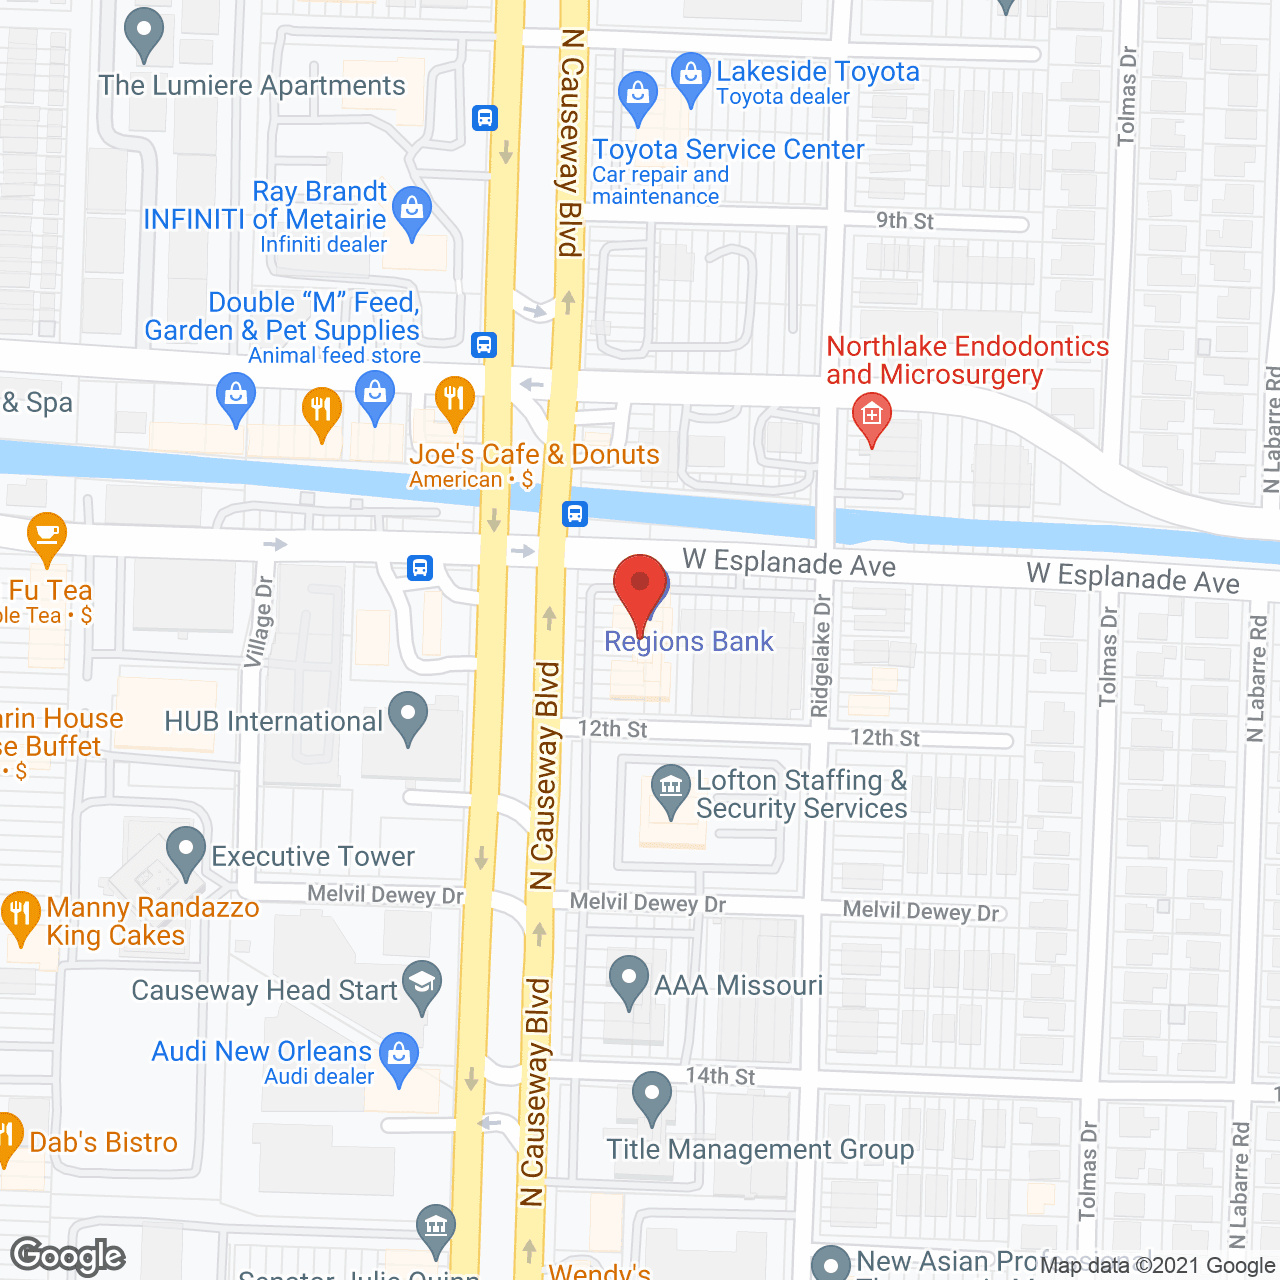 A First Name Basis - Metairie in google map